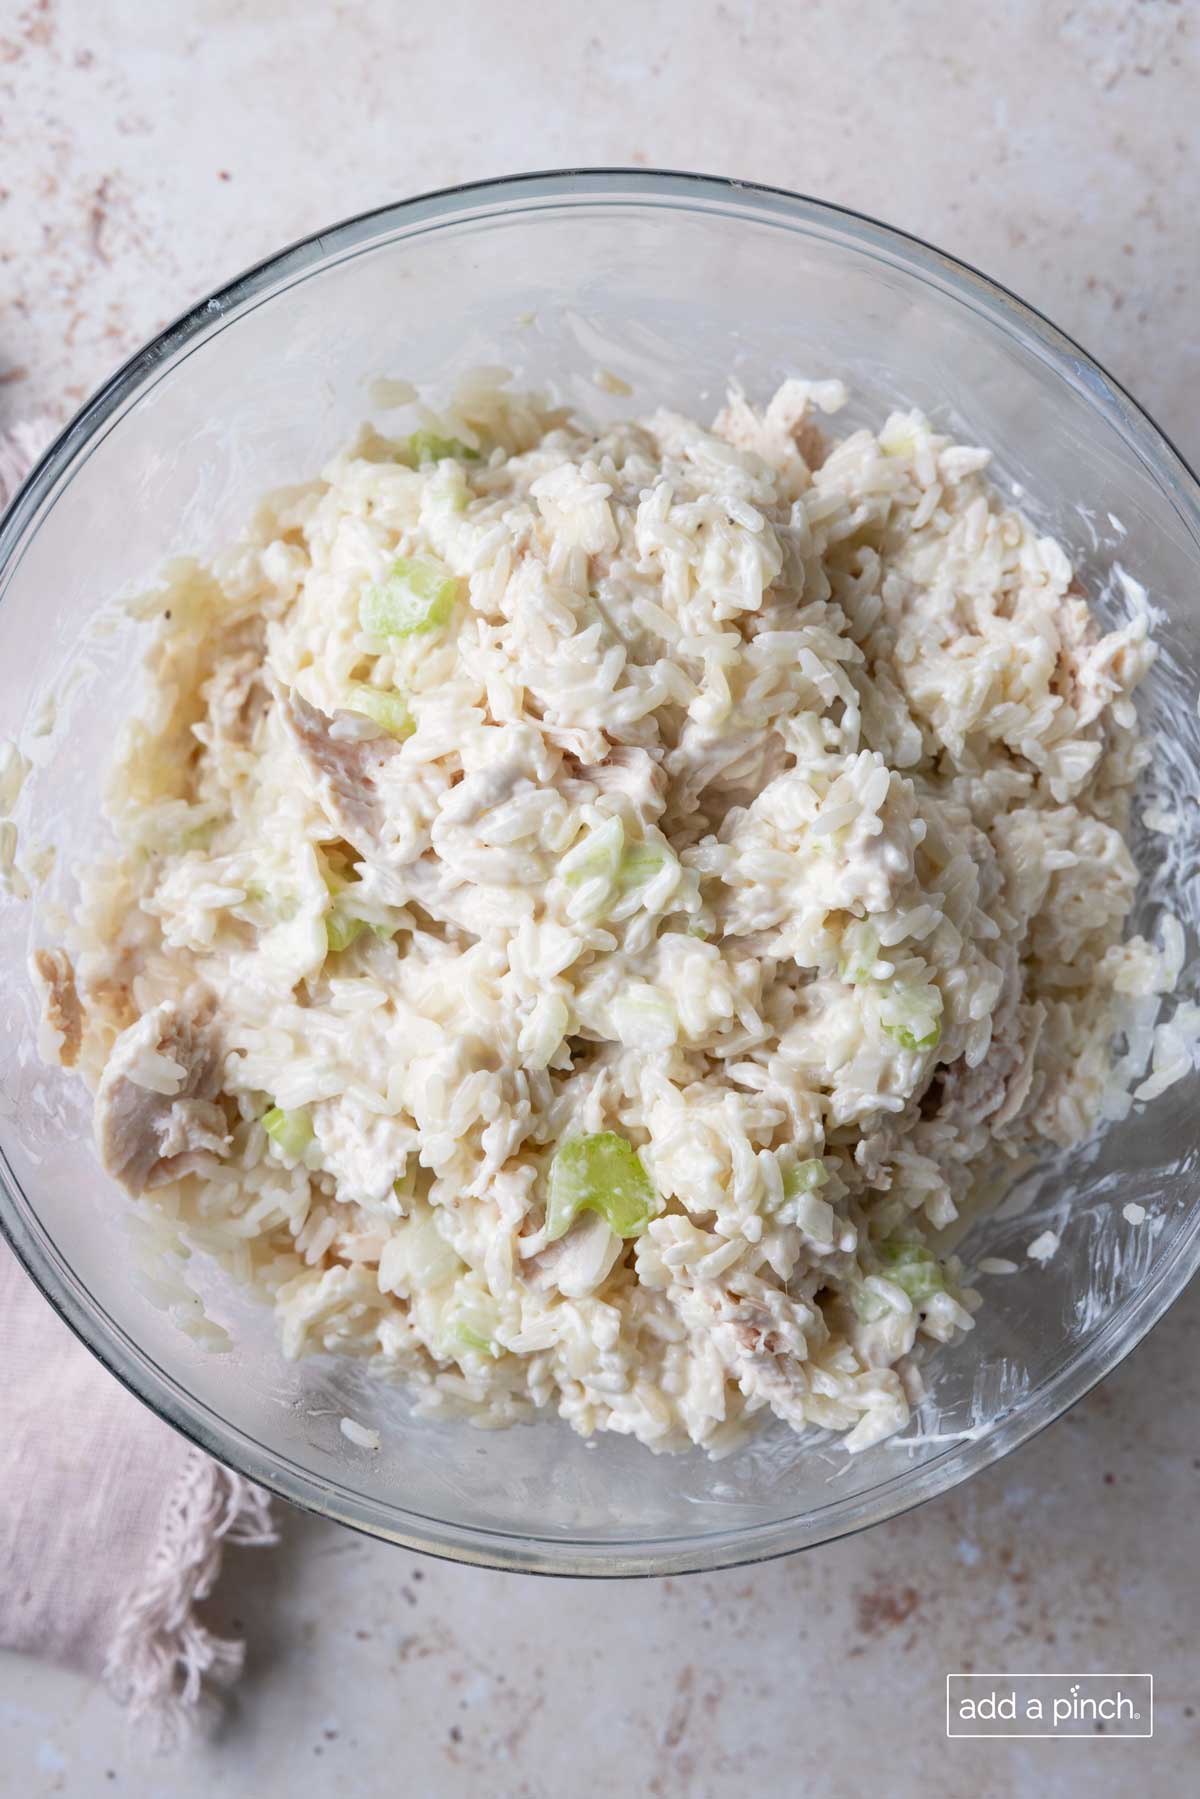 Chicken and rice casserole mixture in a glass bowl.